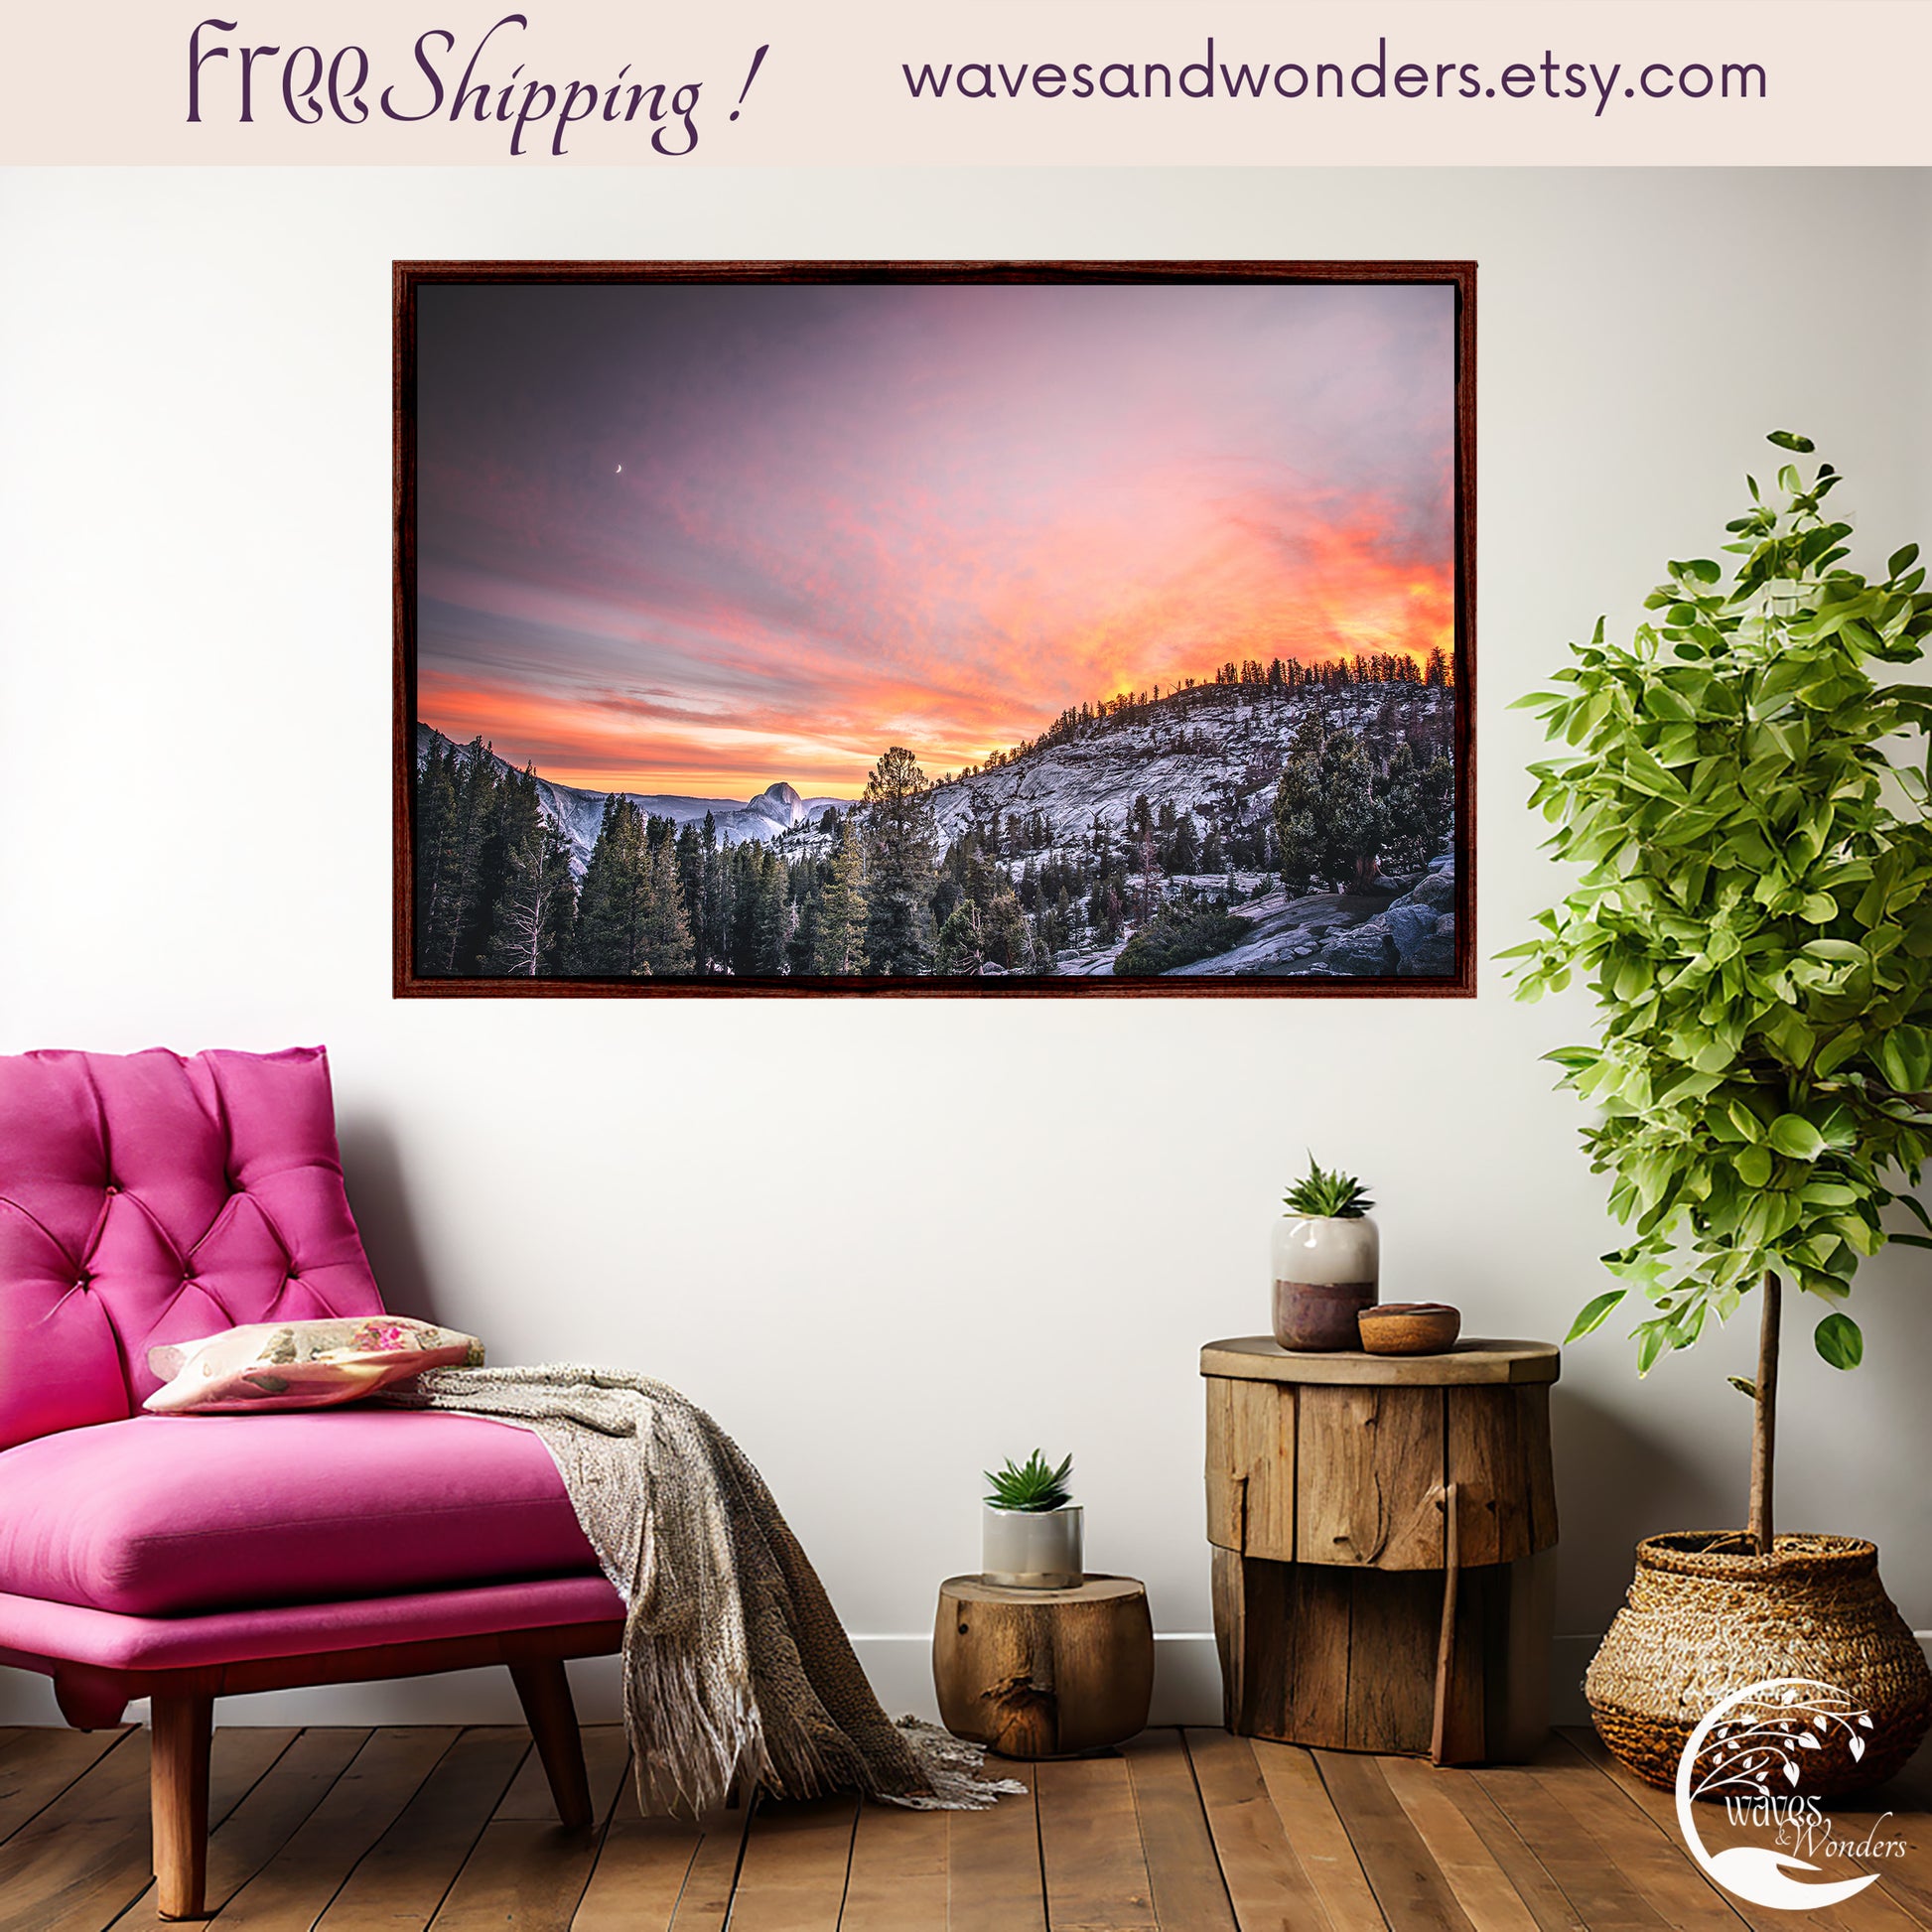 a pink chair sitting in front of a picture of a mountain